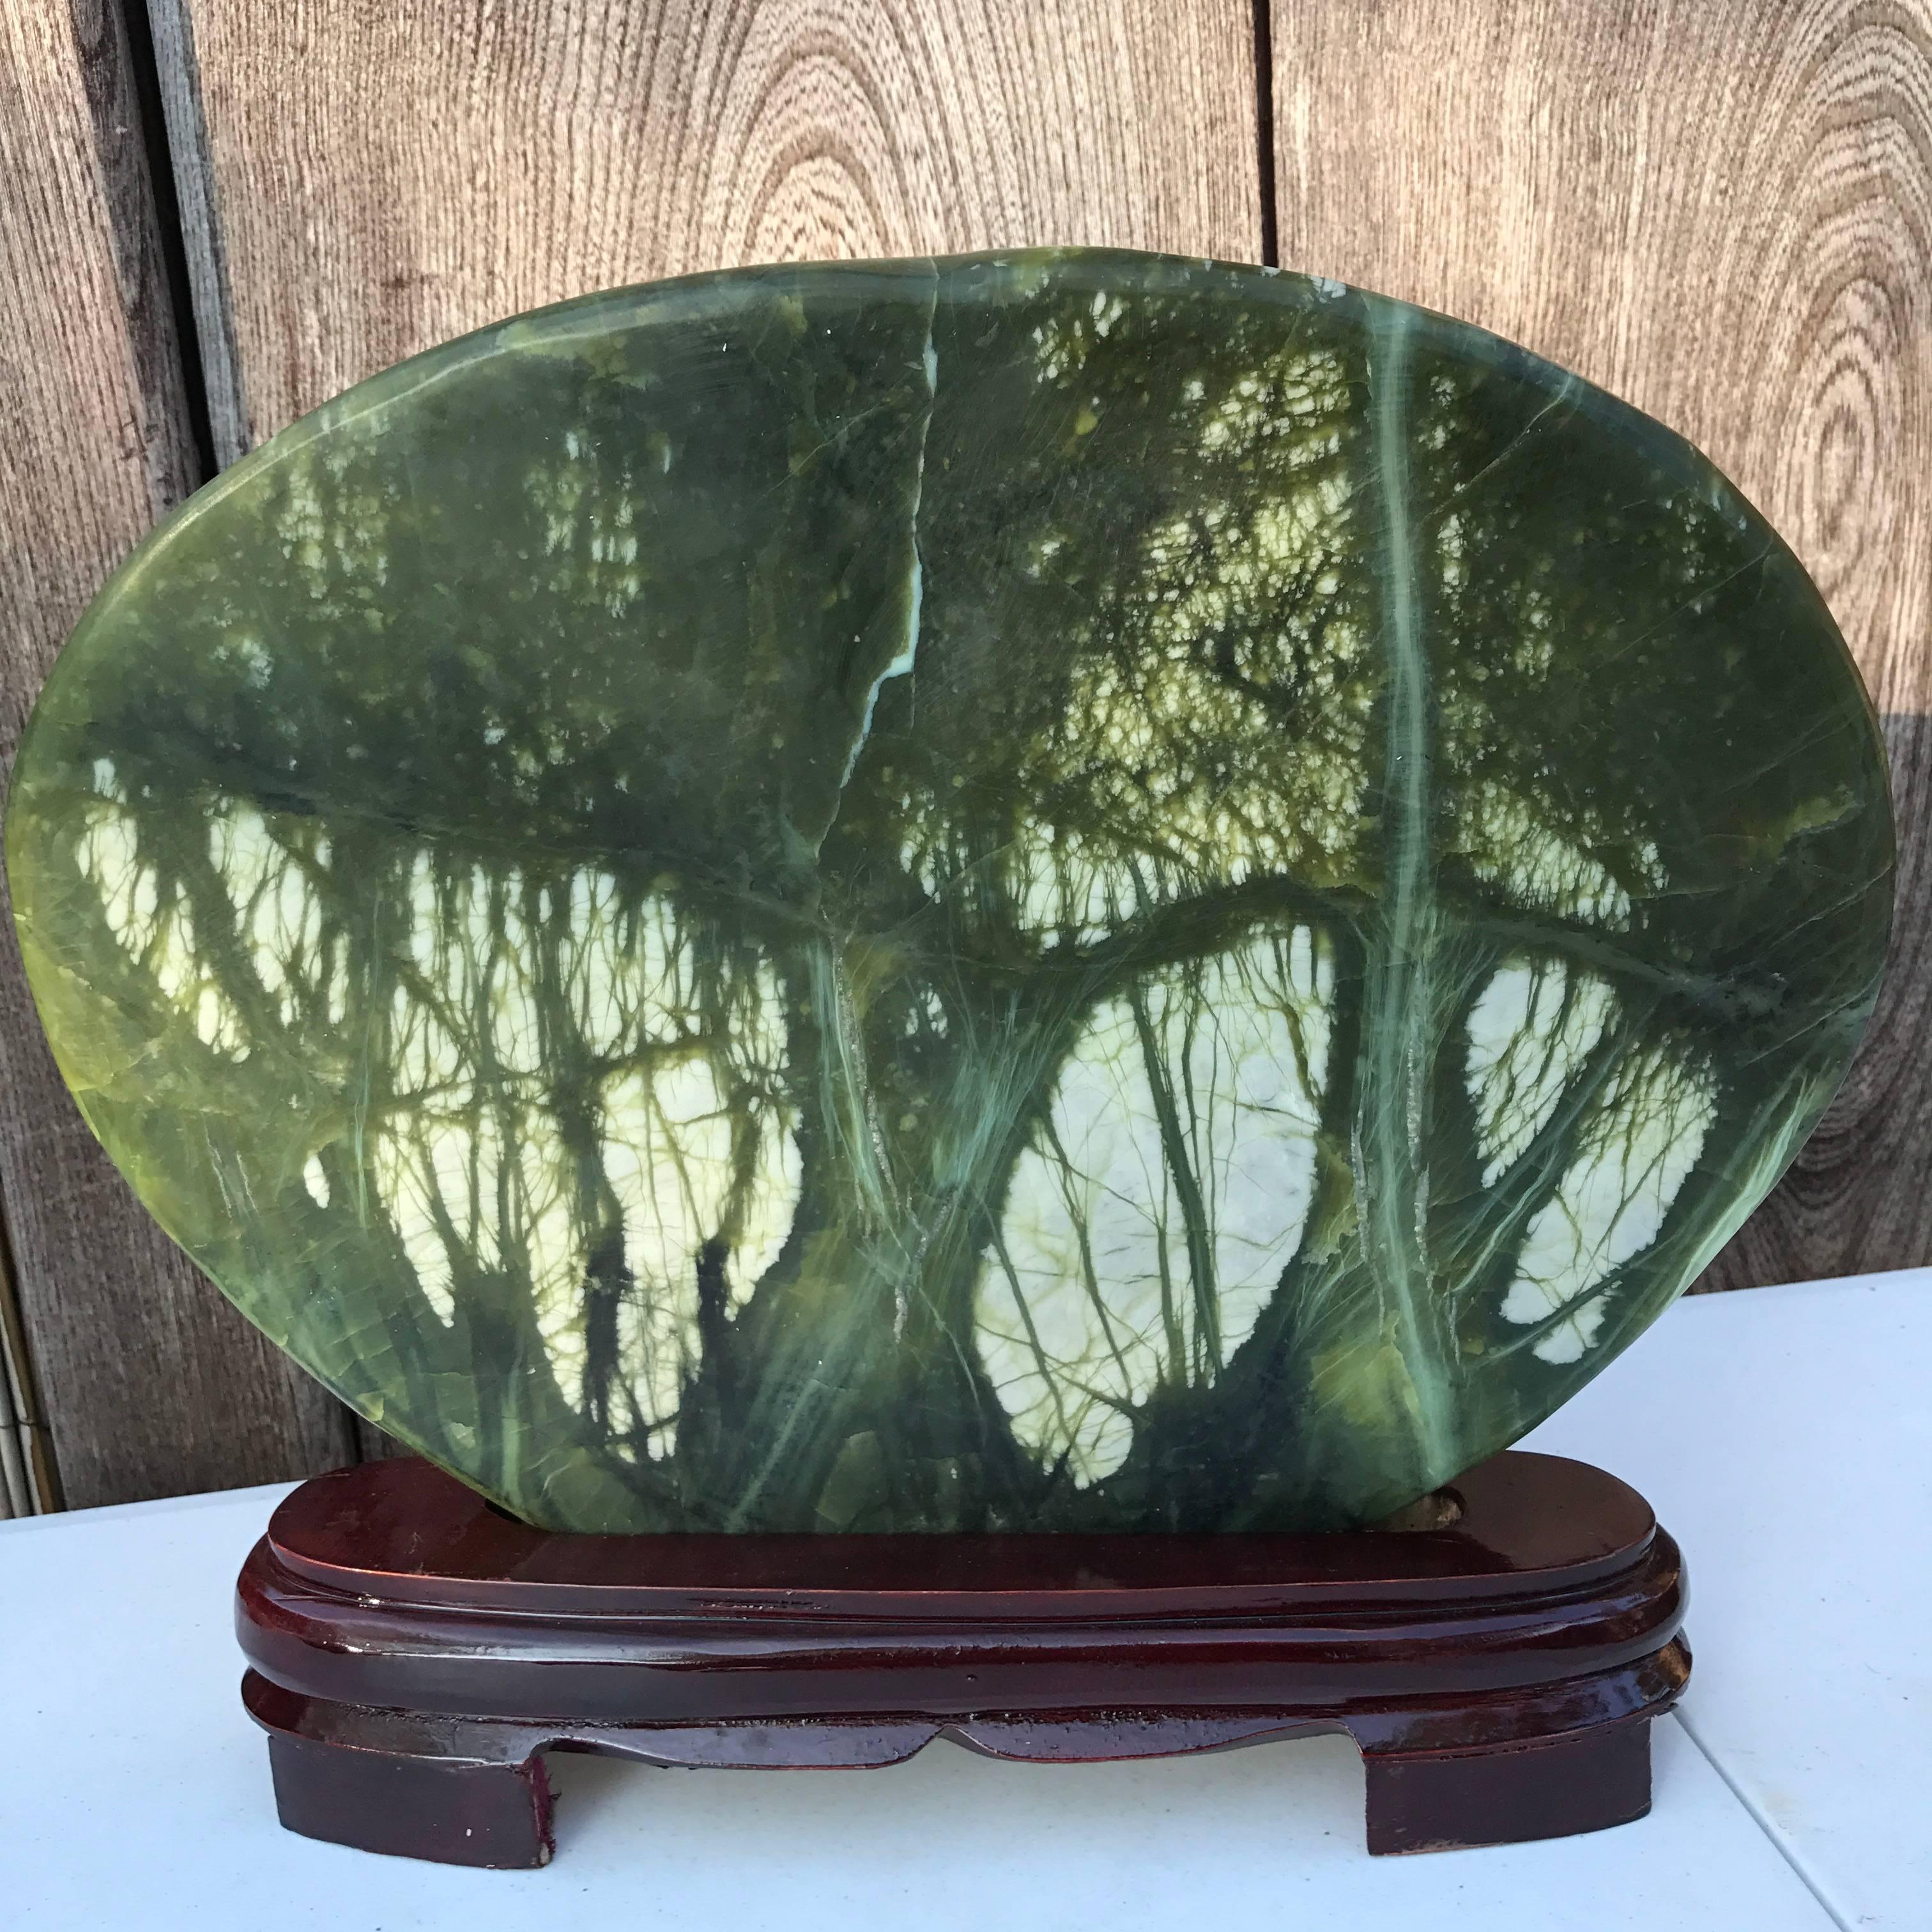 This extraordinary natural viewing stone from China in the form of green trees is a completely unique and natural stone that simply takes your breath away. 

Sometimes known as jadestone or bamboo stone, raw rocks or boulders are found in Eastern